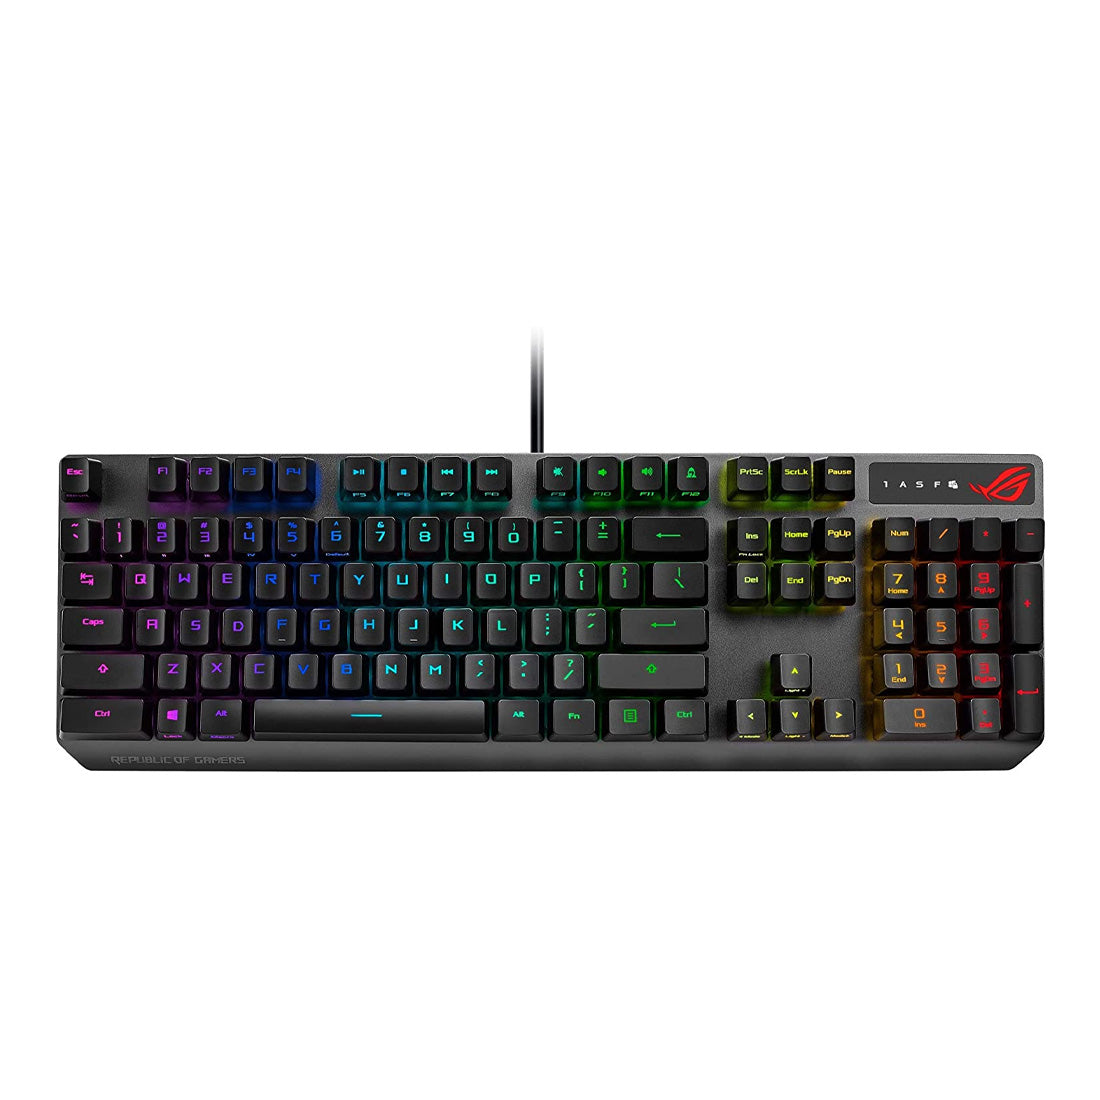 Asus ROG Strix Scope RX Optical Mechanical Gaming Keyboard with IP56 Water Resistance and Stealth Key